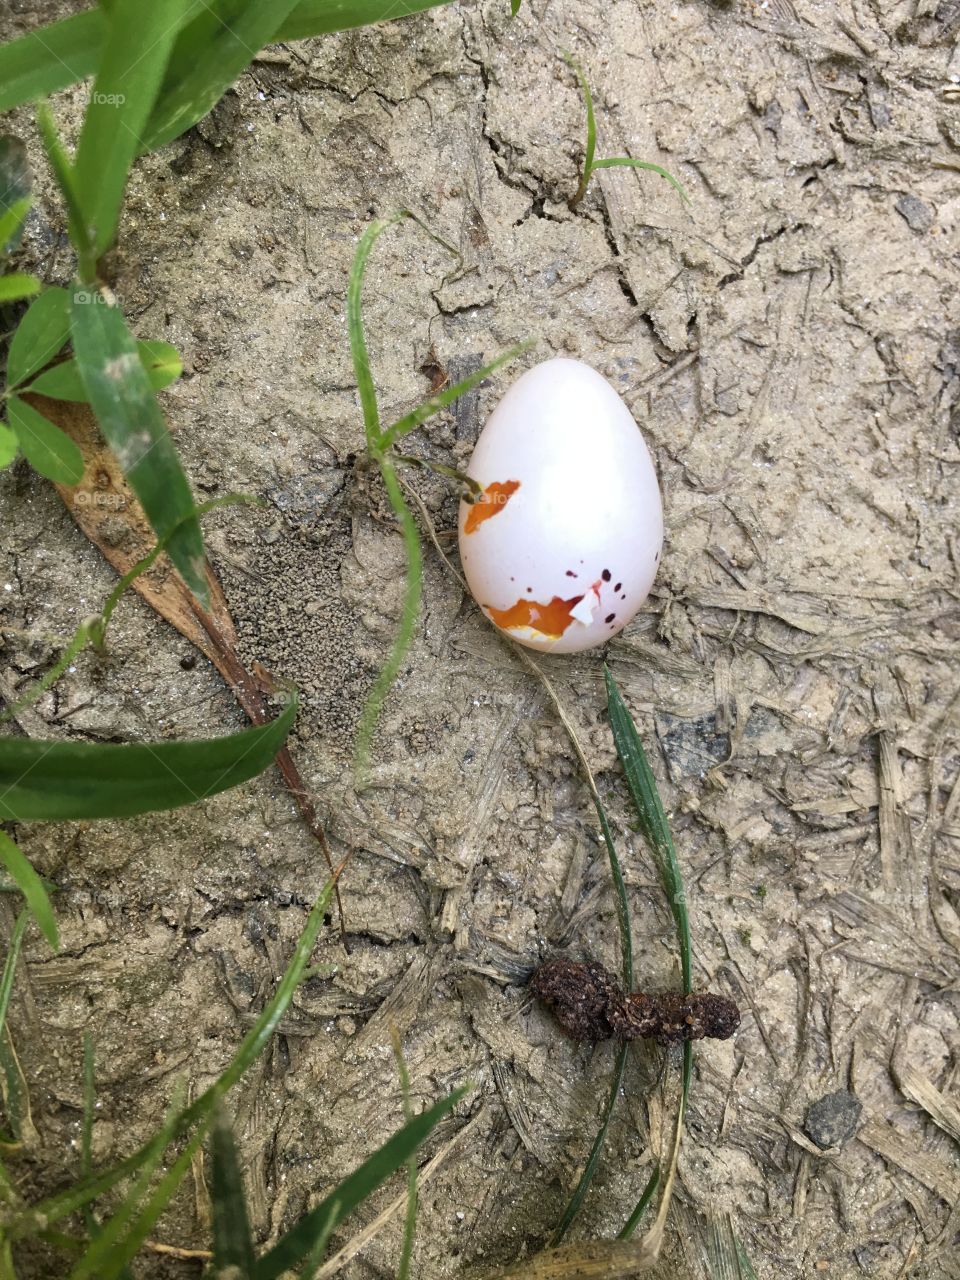 Broken tiny pink bird egg on the ground in the park.